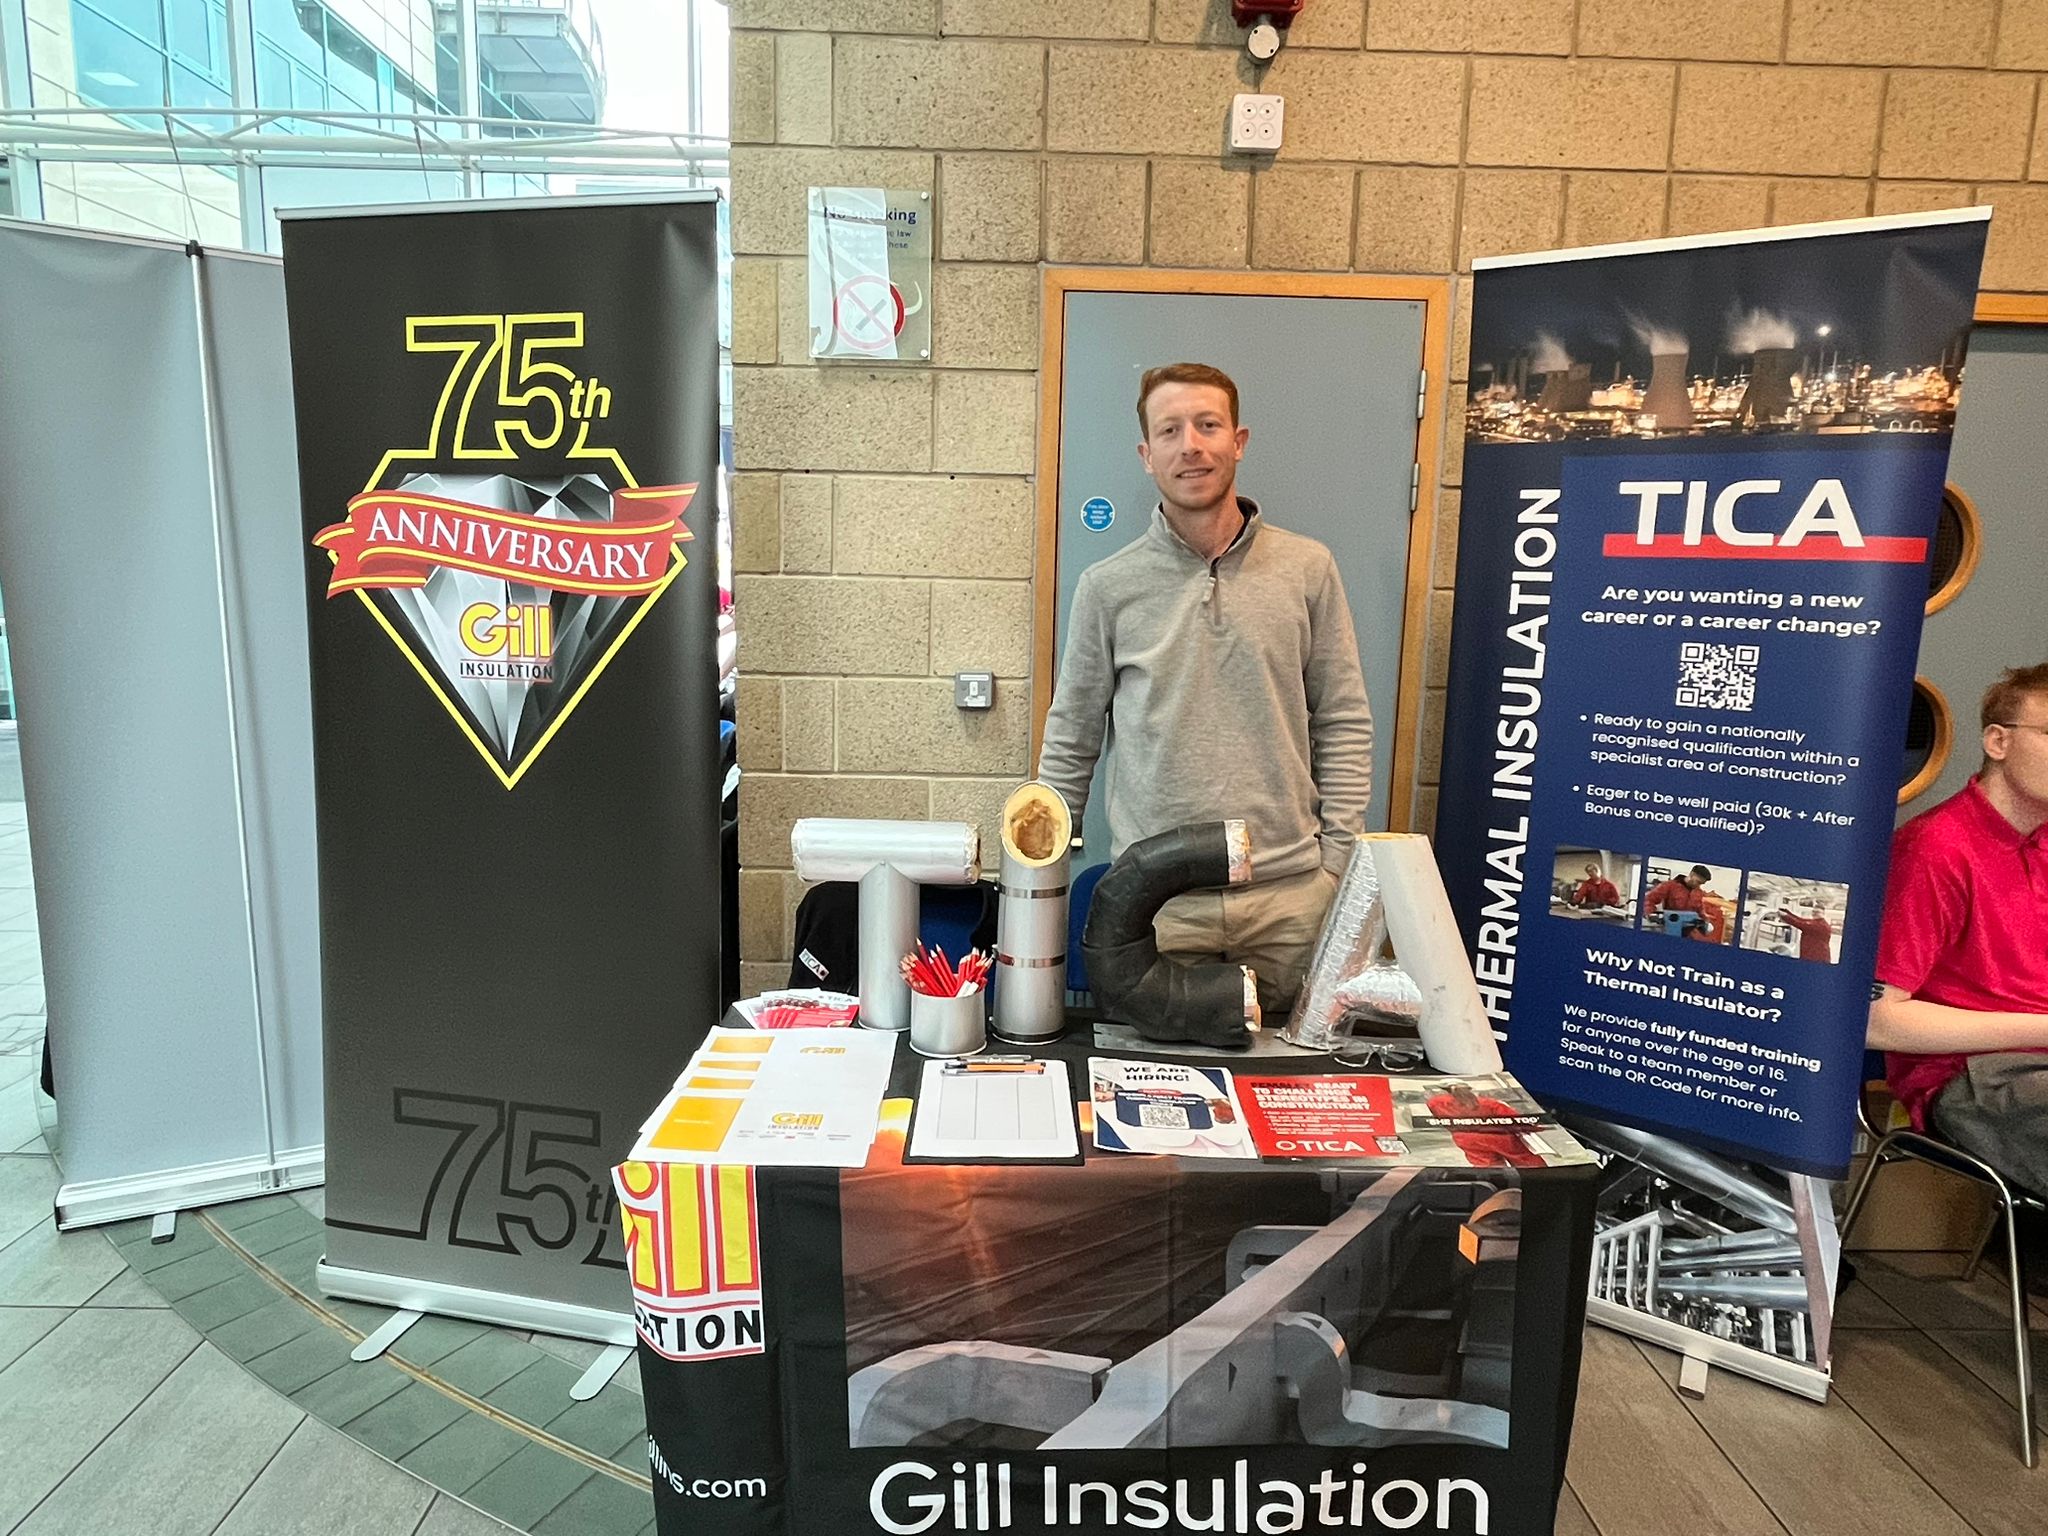 Gill Insulation at our event in Nottingham